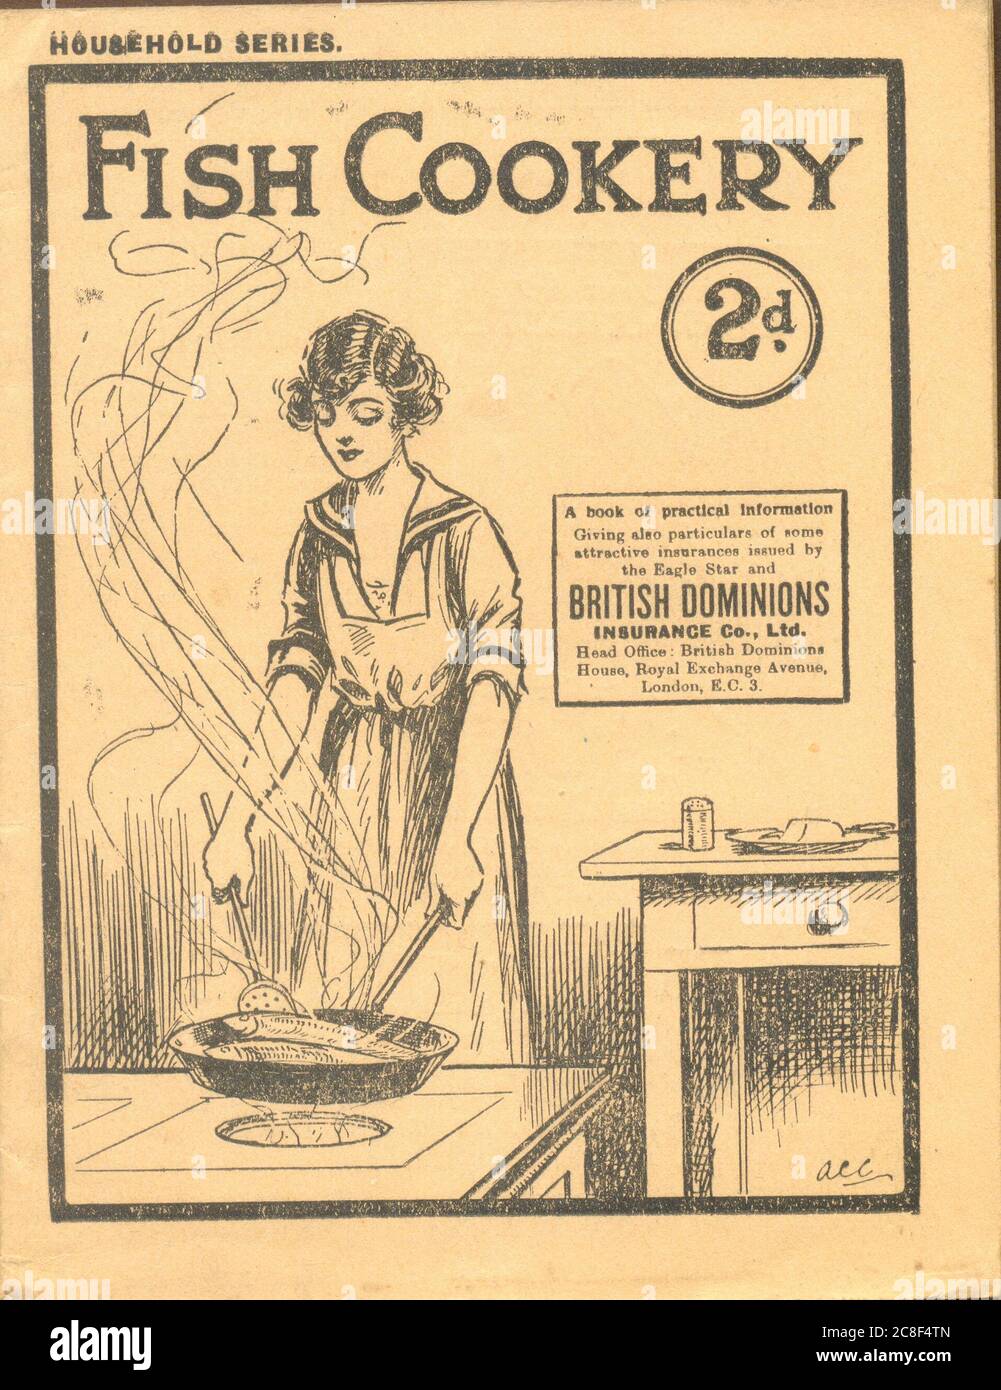 Advertising booklet titled Fish Cookery by Mrs E Maitland for  British Dominions Insurance Co., Ltd.  1925 Stock Photo